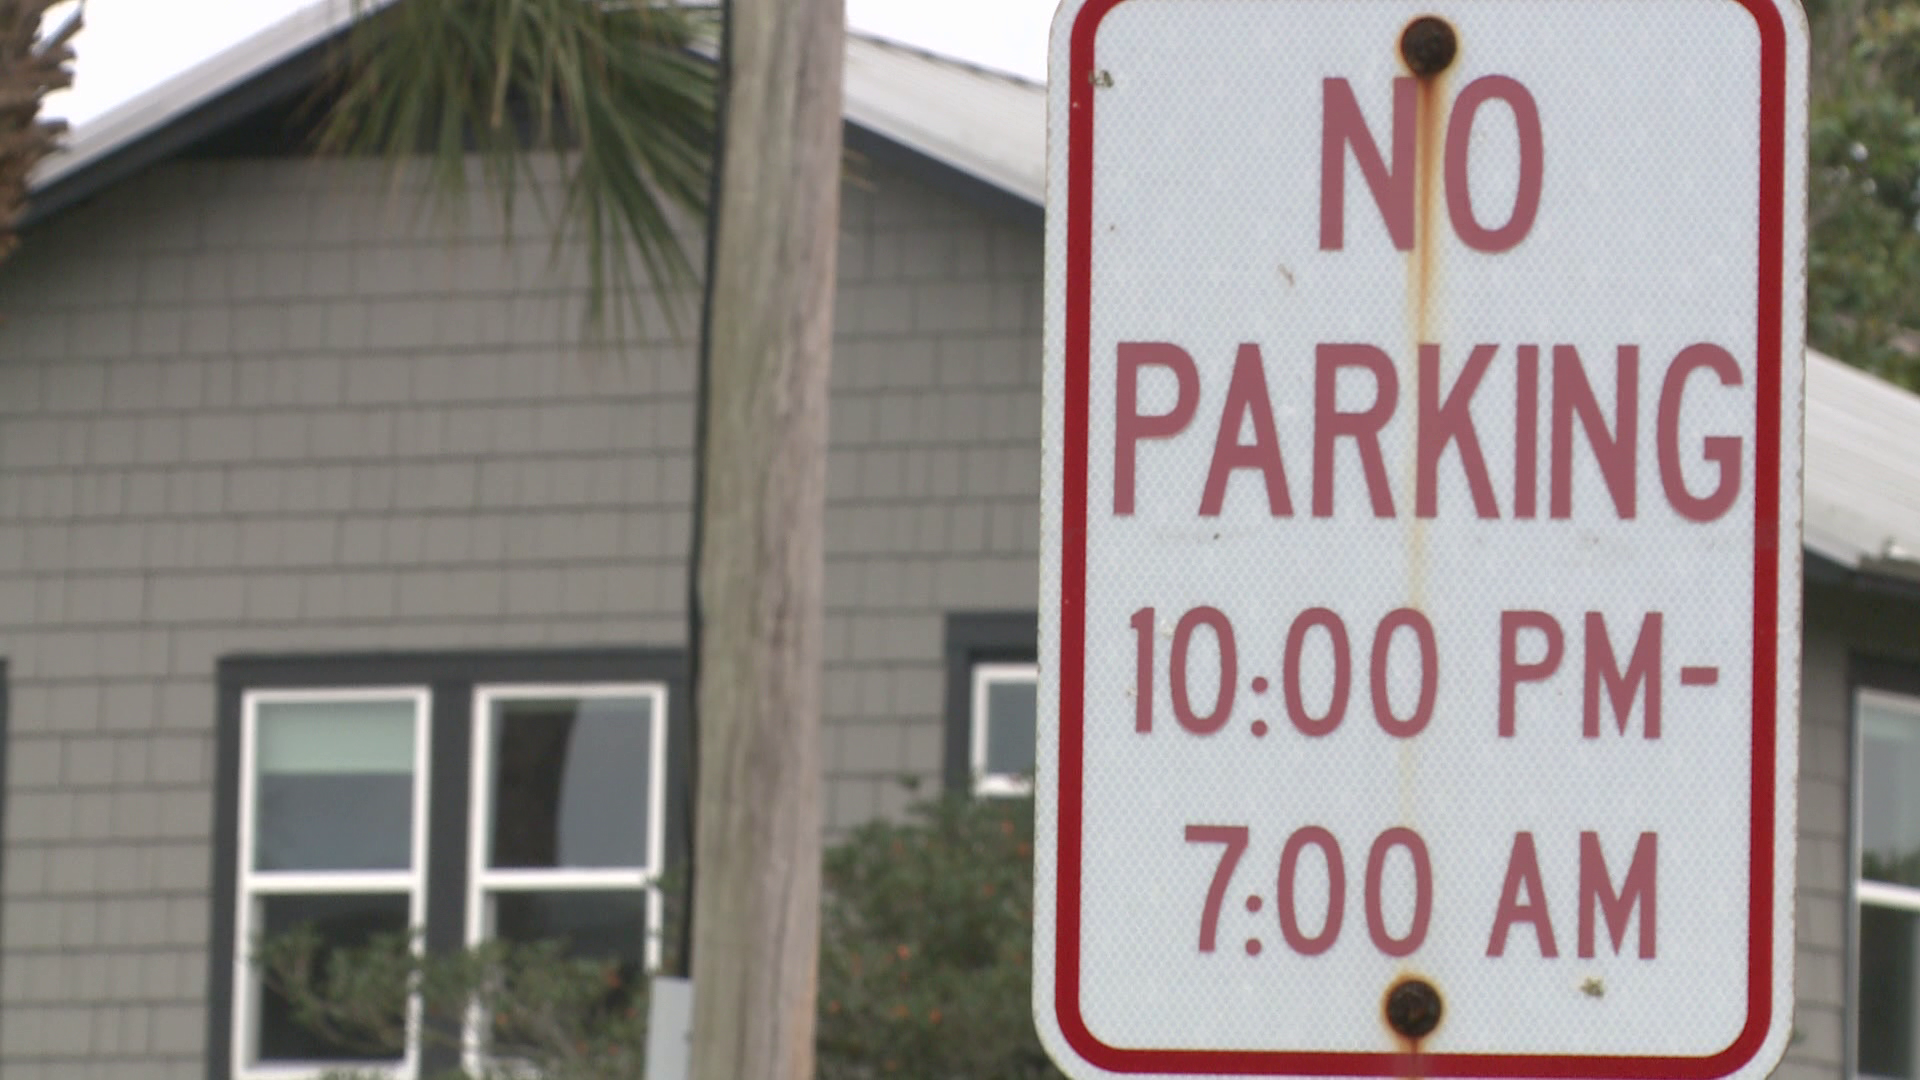 Elite Management Services proposed to charge a Neptune Beach visitor $2.50 an hour or $35.00 a day. Residents of this area say they are upset with the idea.